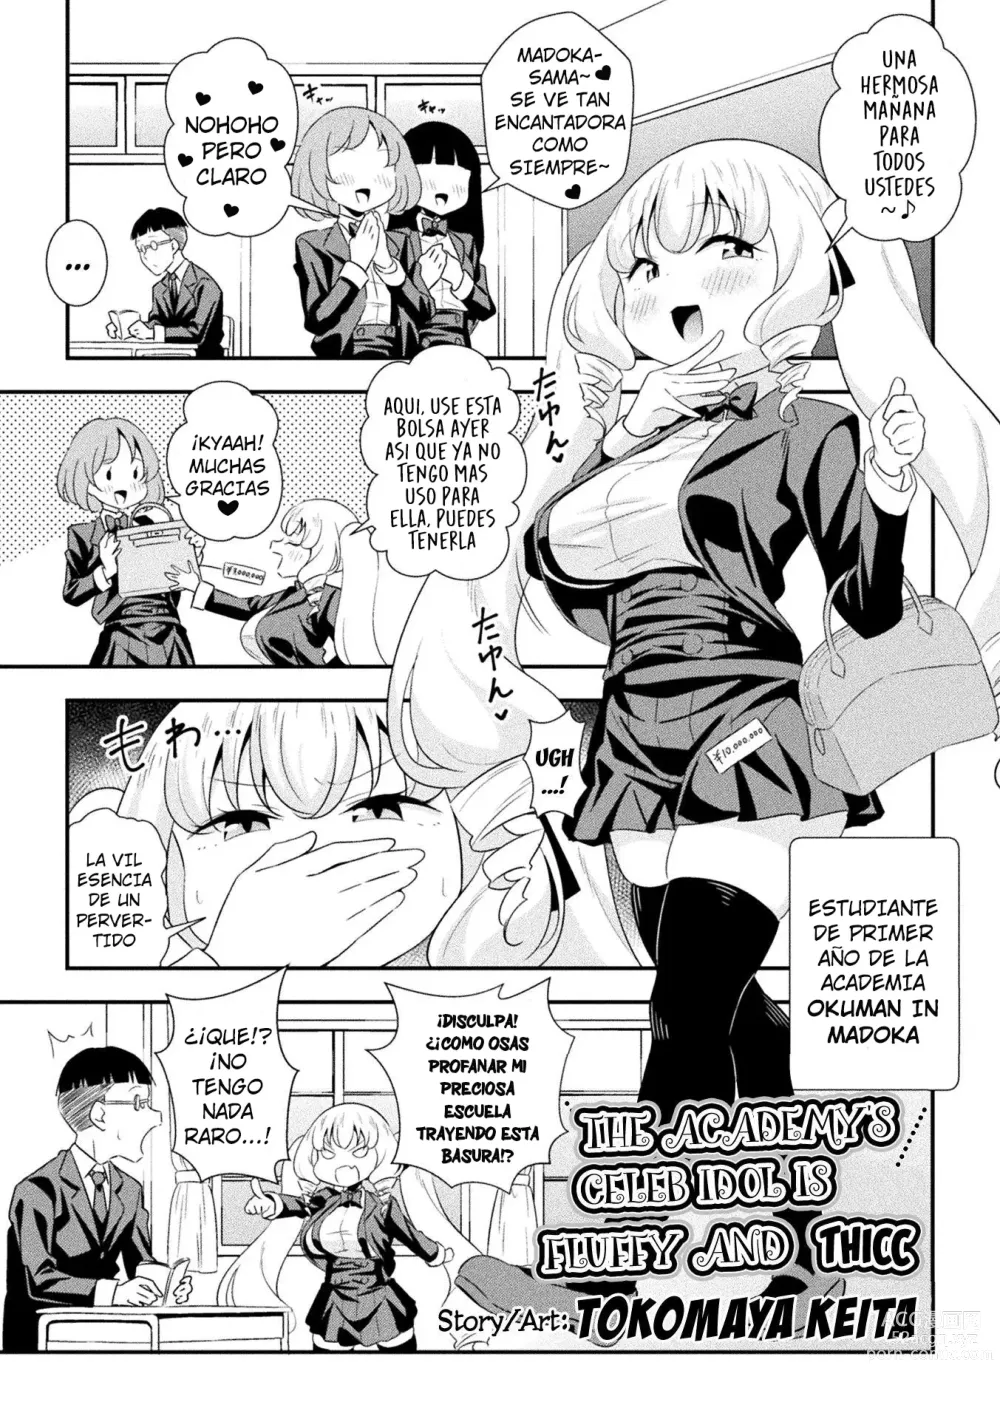 Page 1 of manga The Academy's Celeb Idol is Fluffy and Thicc